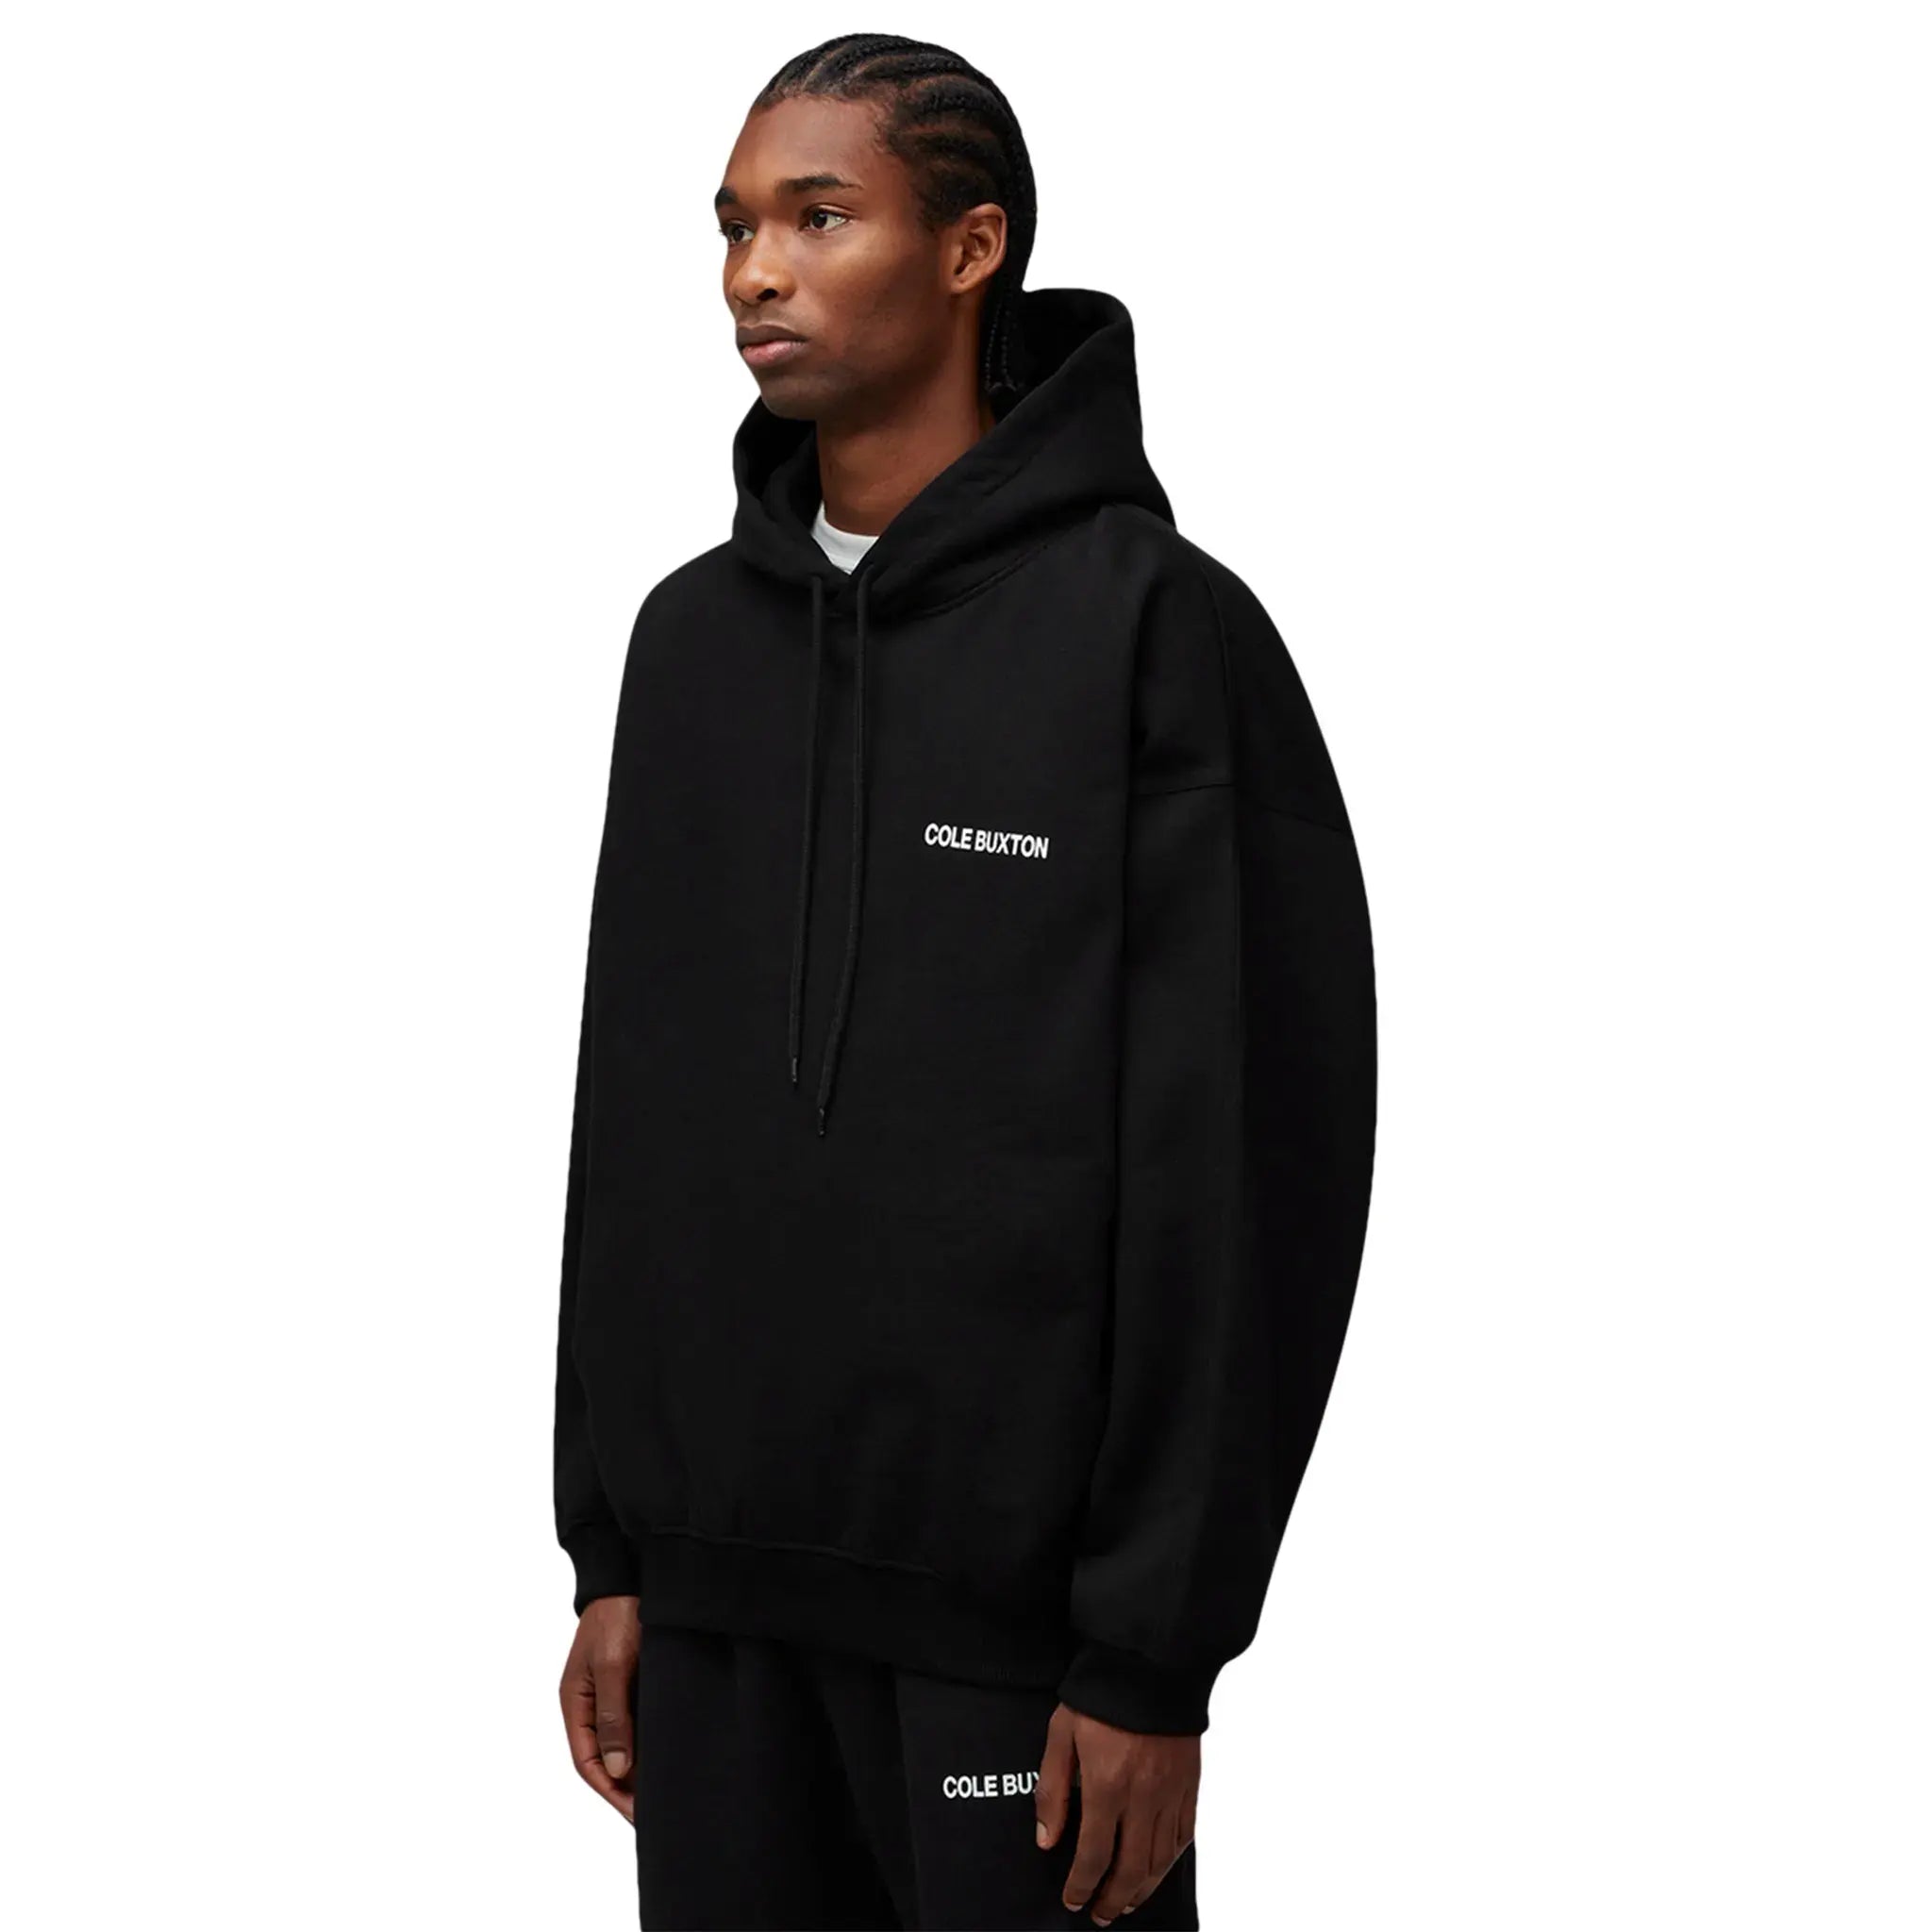 Model front view of Cole Buxton CB Sportswear Black Hoodie SS23SPHO001-000